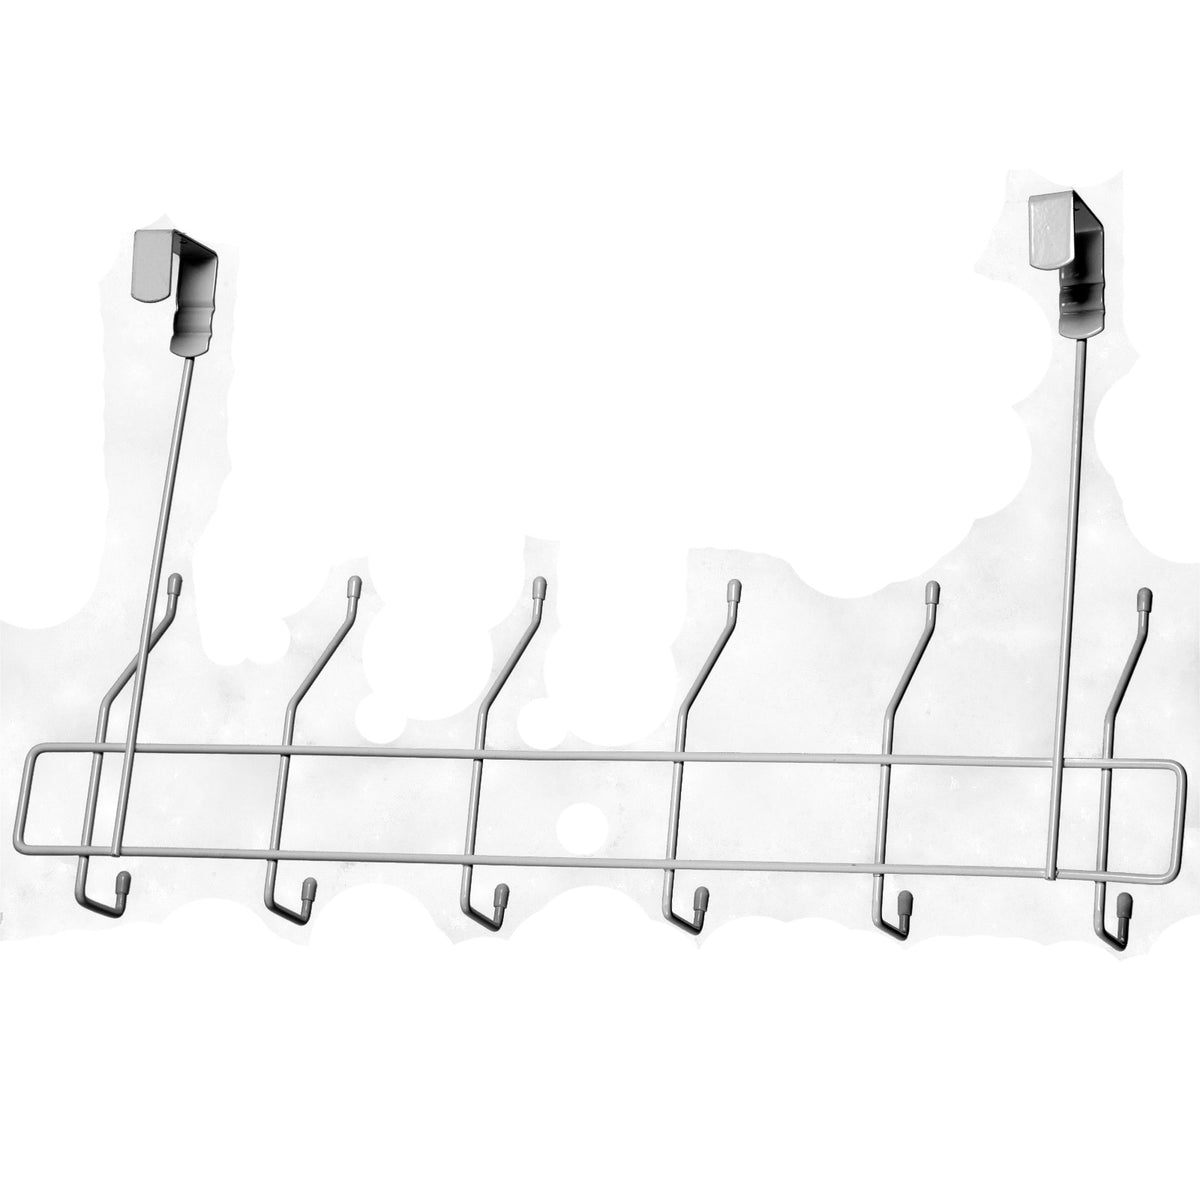 buy hangers at cheap rate in bulk. wholesale & retail laundry baskets & irons store.